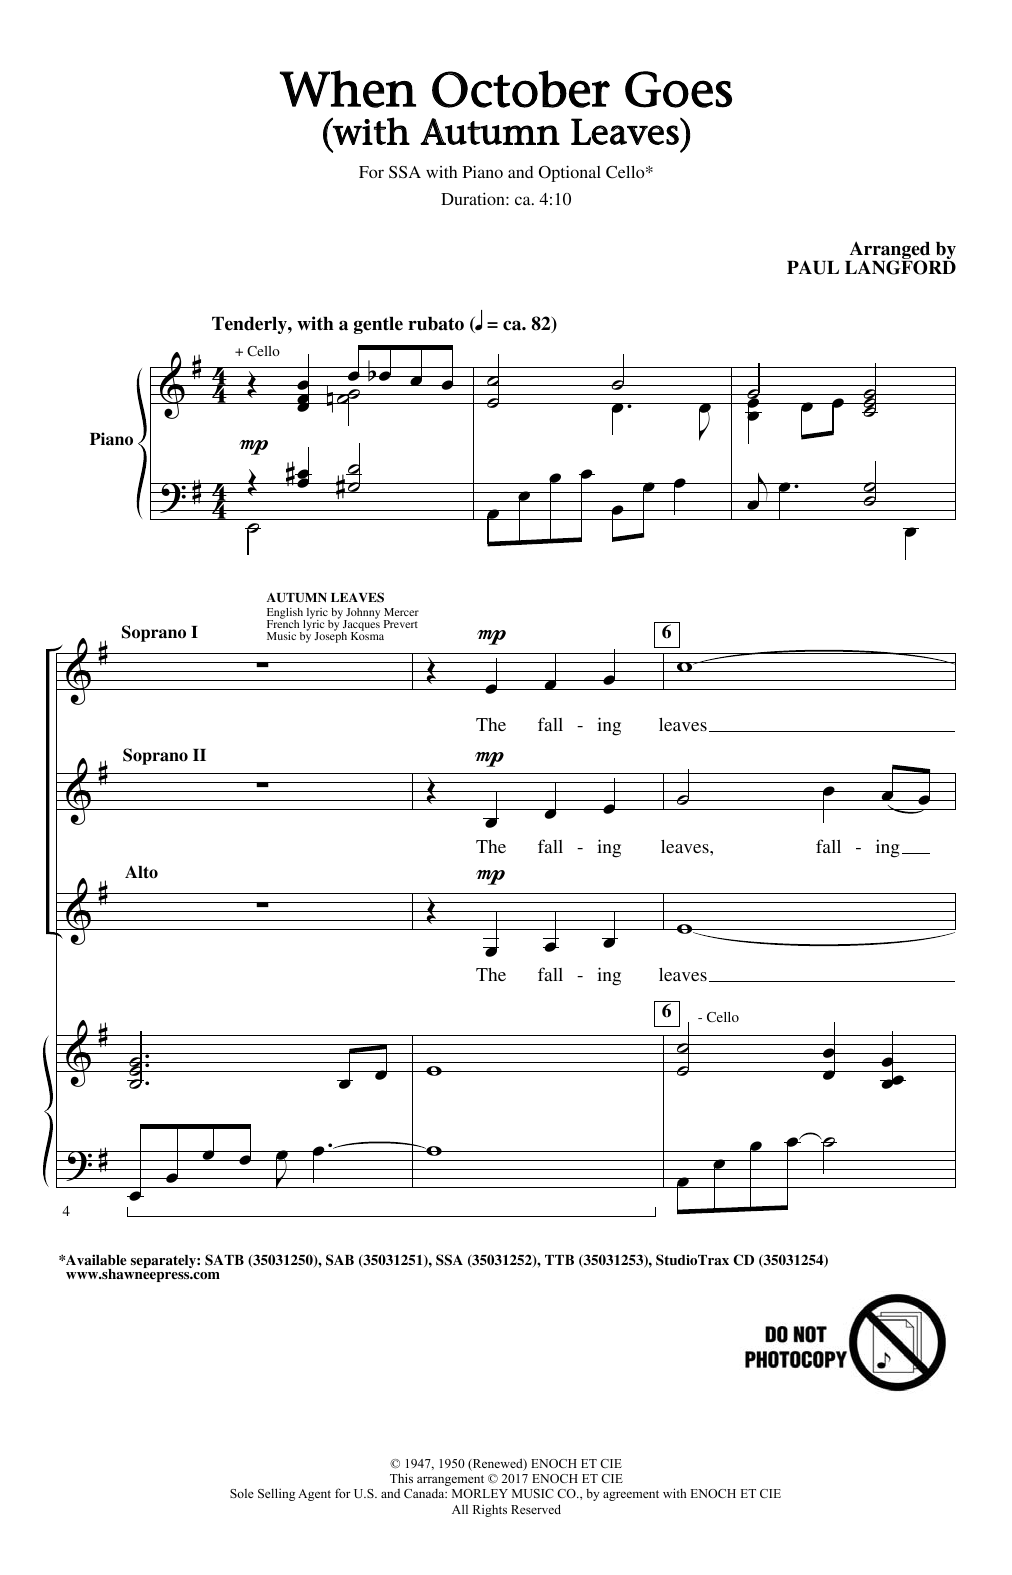 Download Paul Langford When October Goes (with Autumn Leaves) Sheet Music